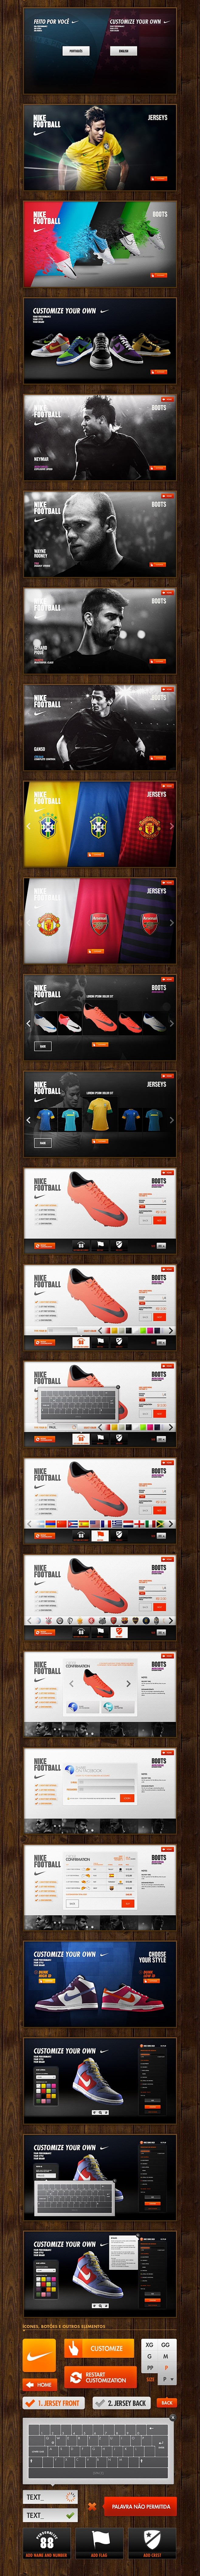 #Nike Touch by Fabri...